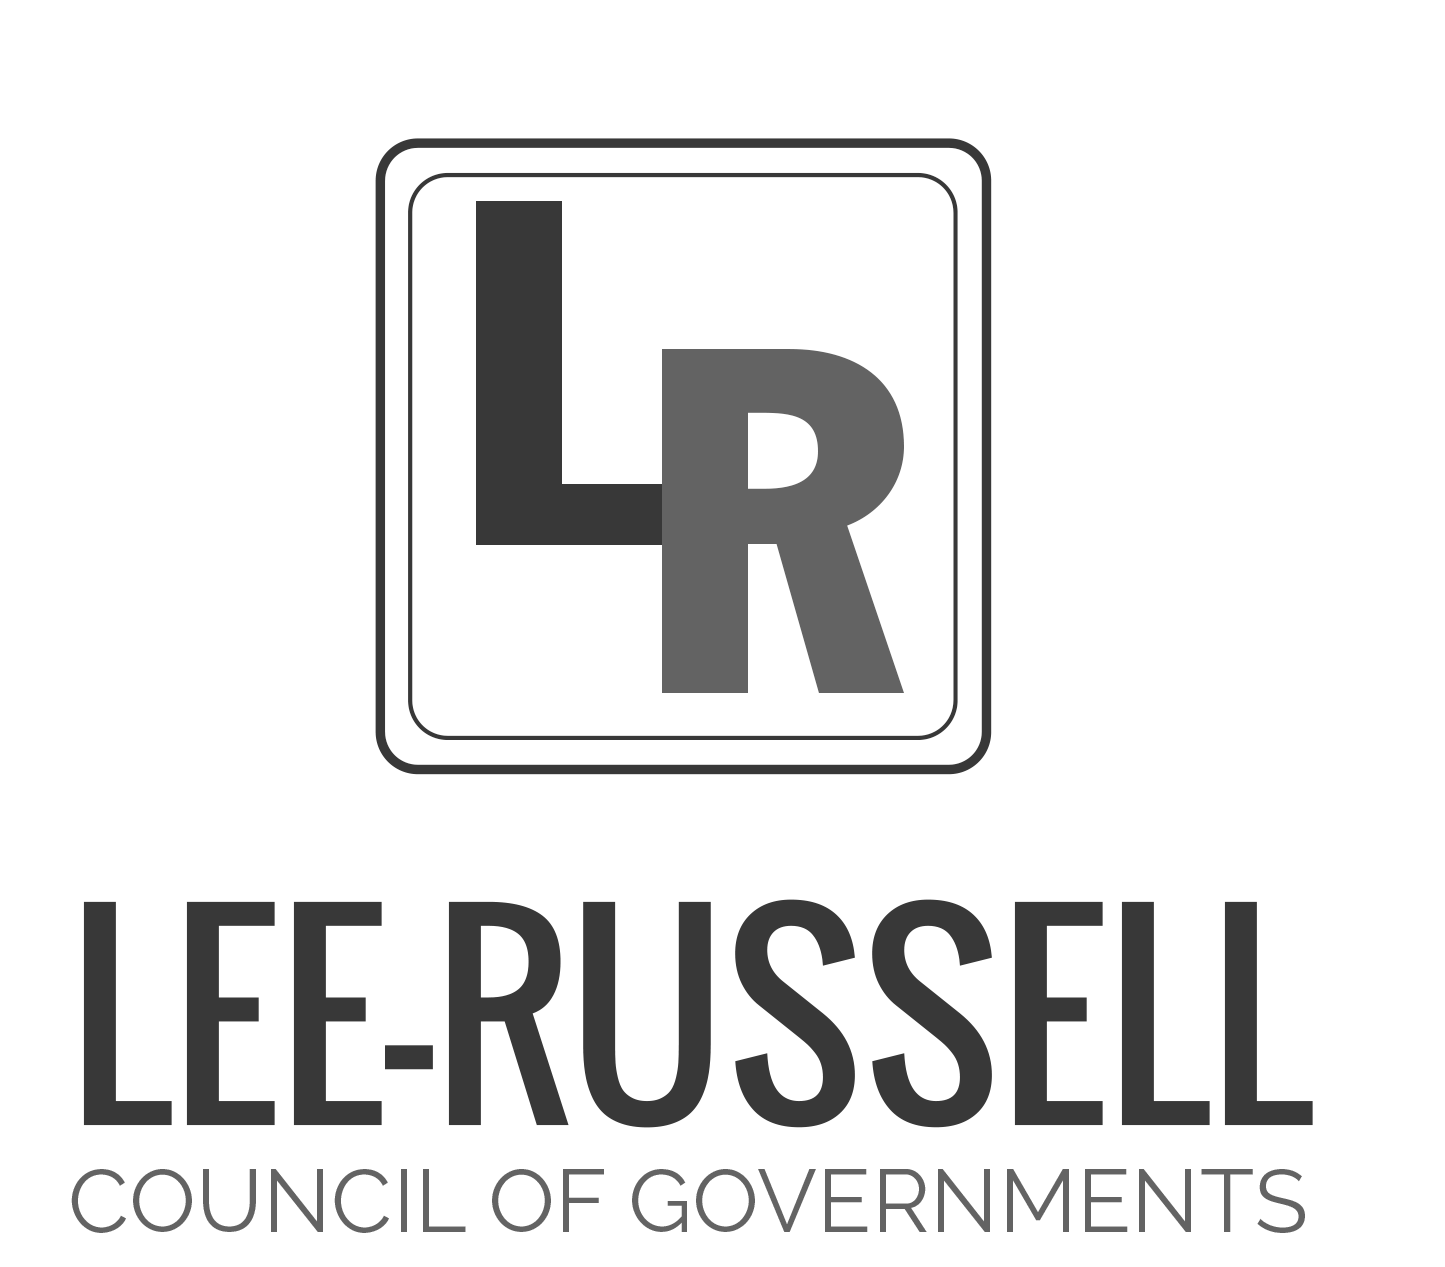 Lee-Russel Council of Governments